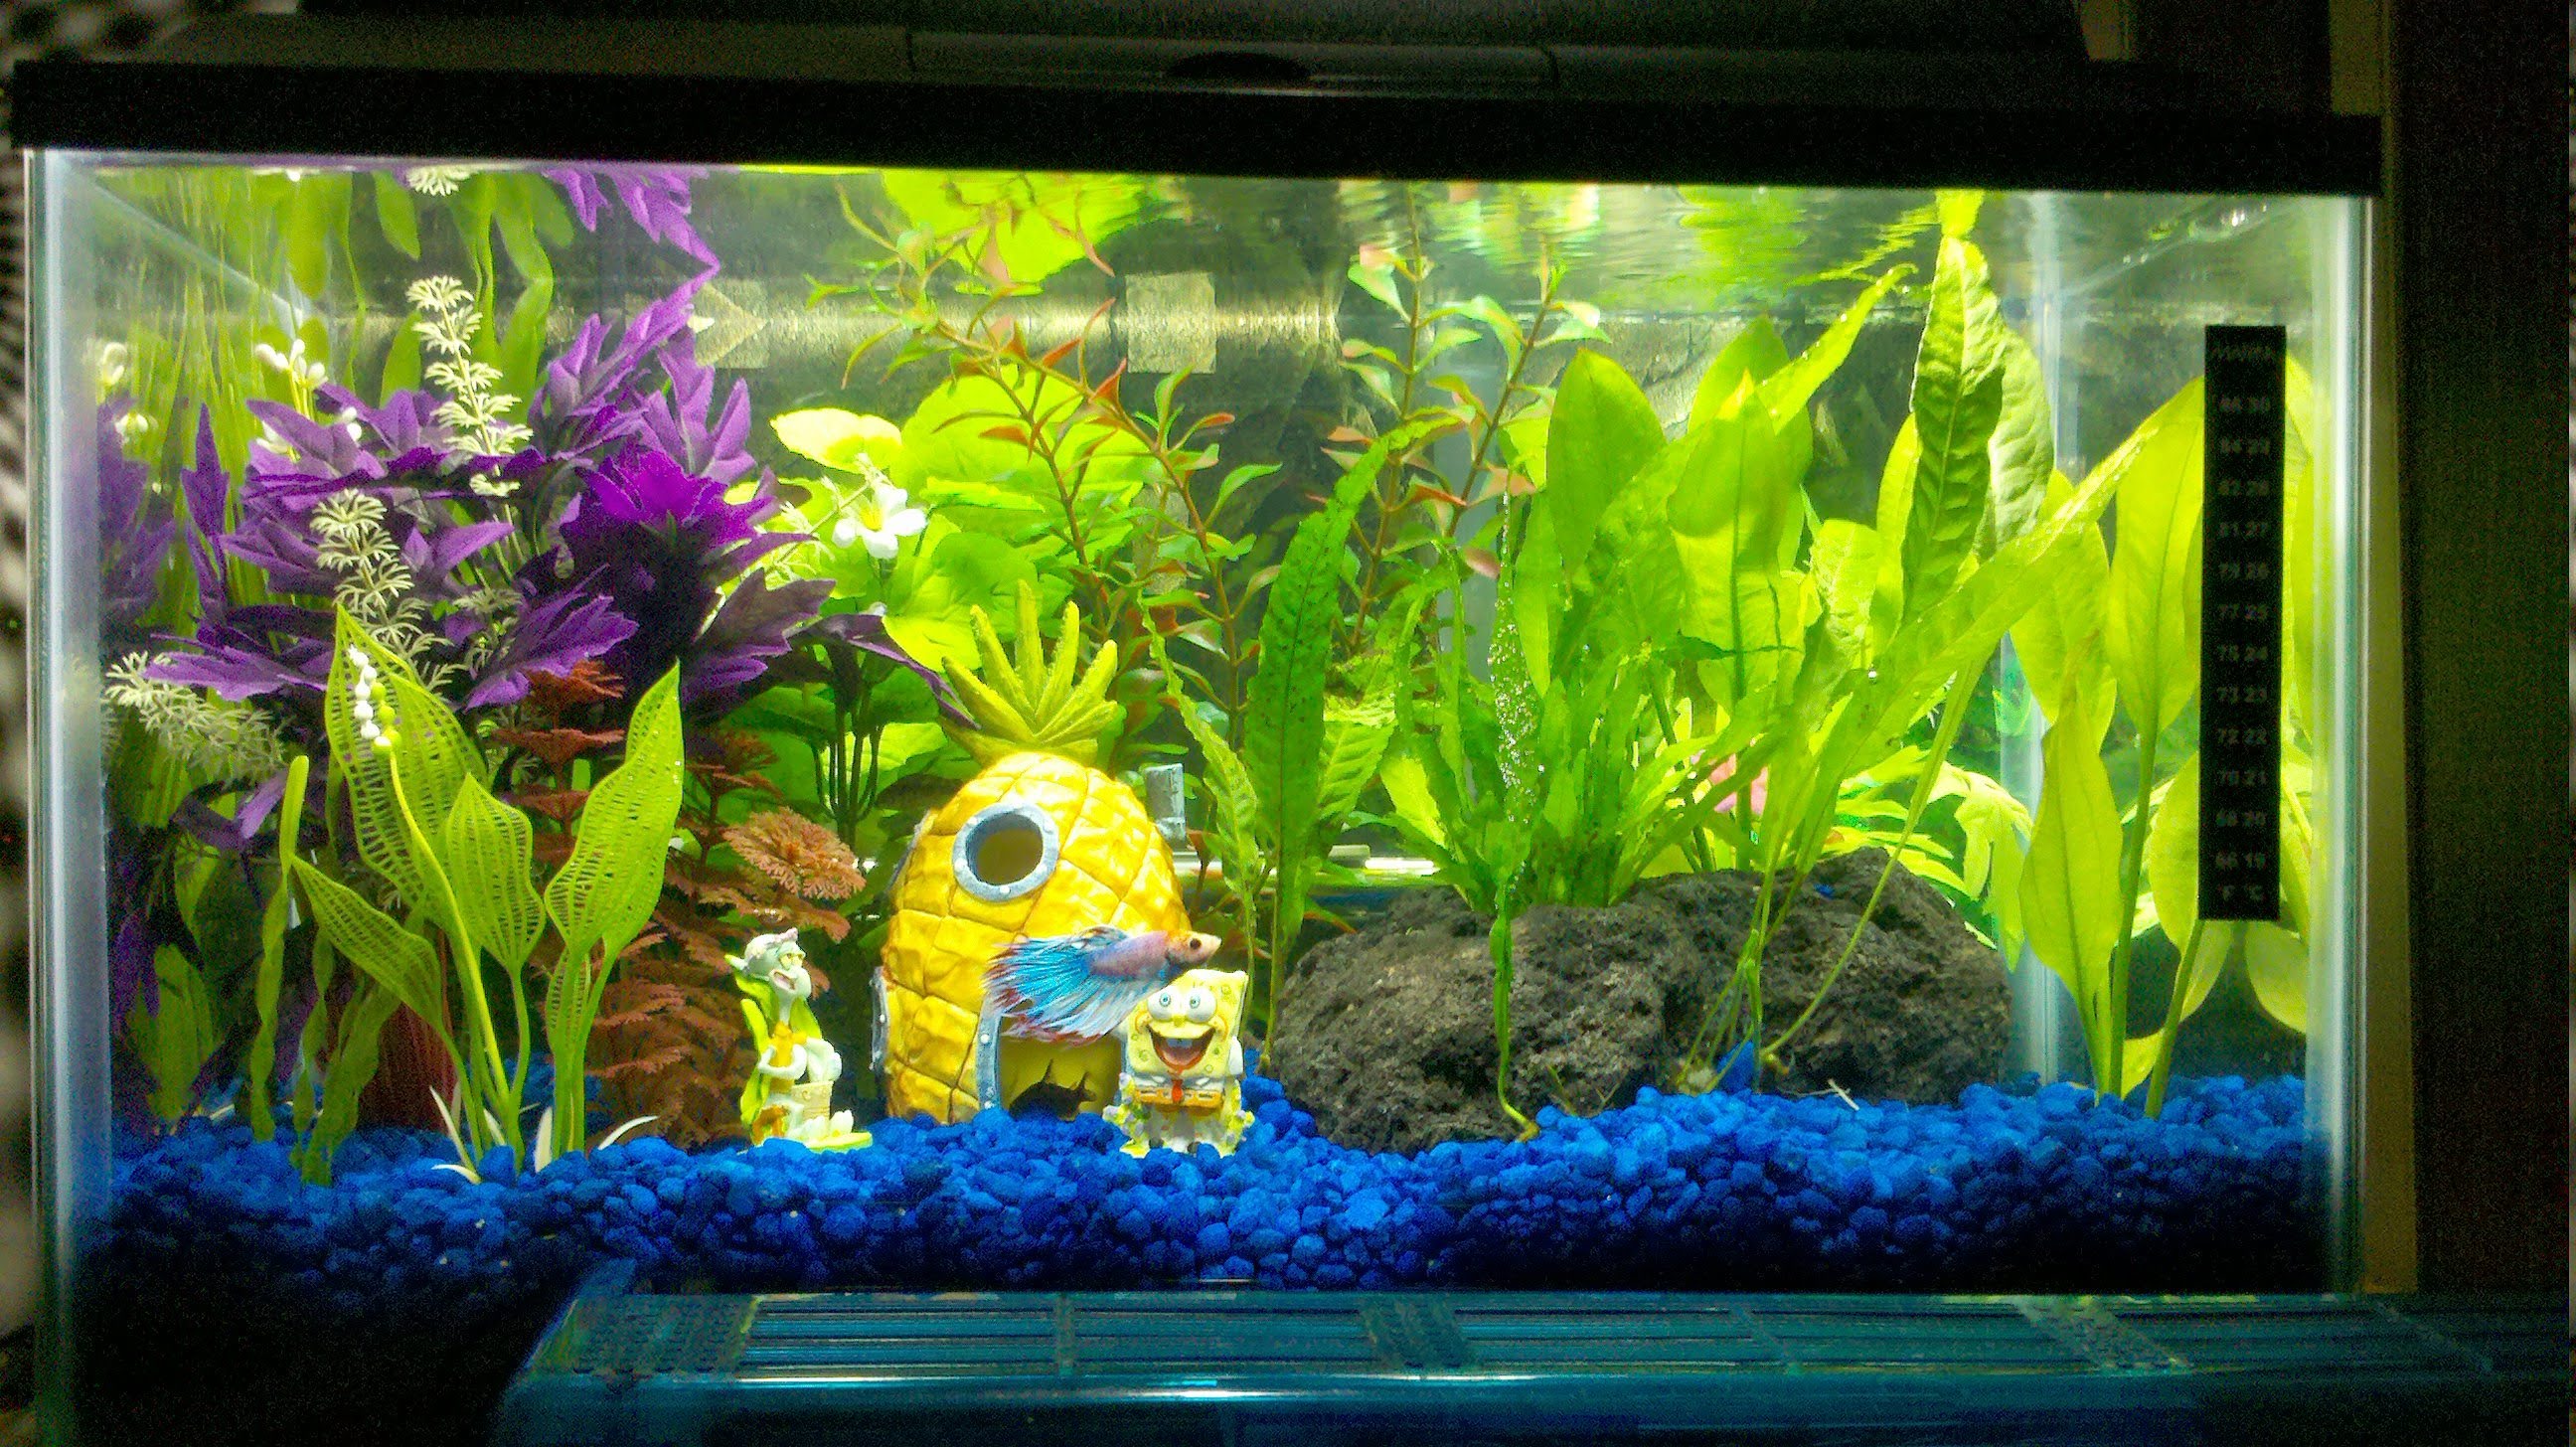 10 Gallon Betta Lair. My first tank (Pic heavy!) | The Planted Tank Forum